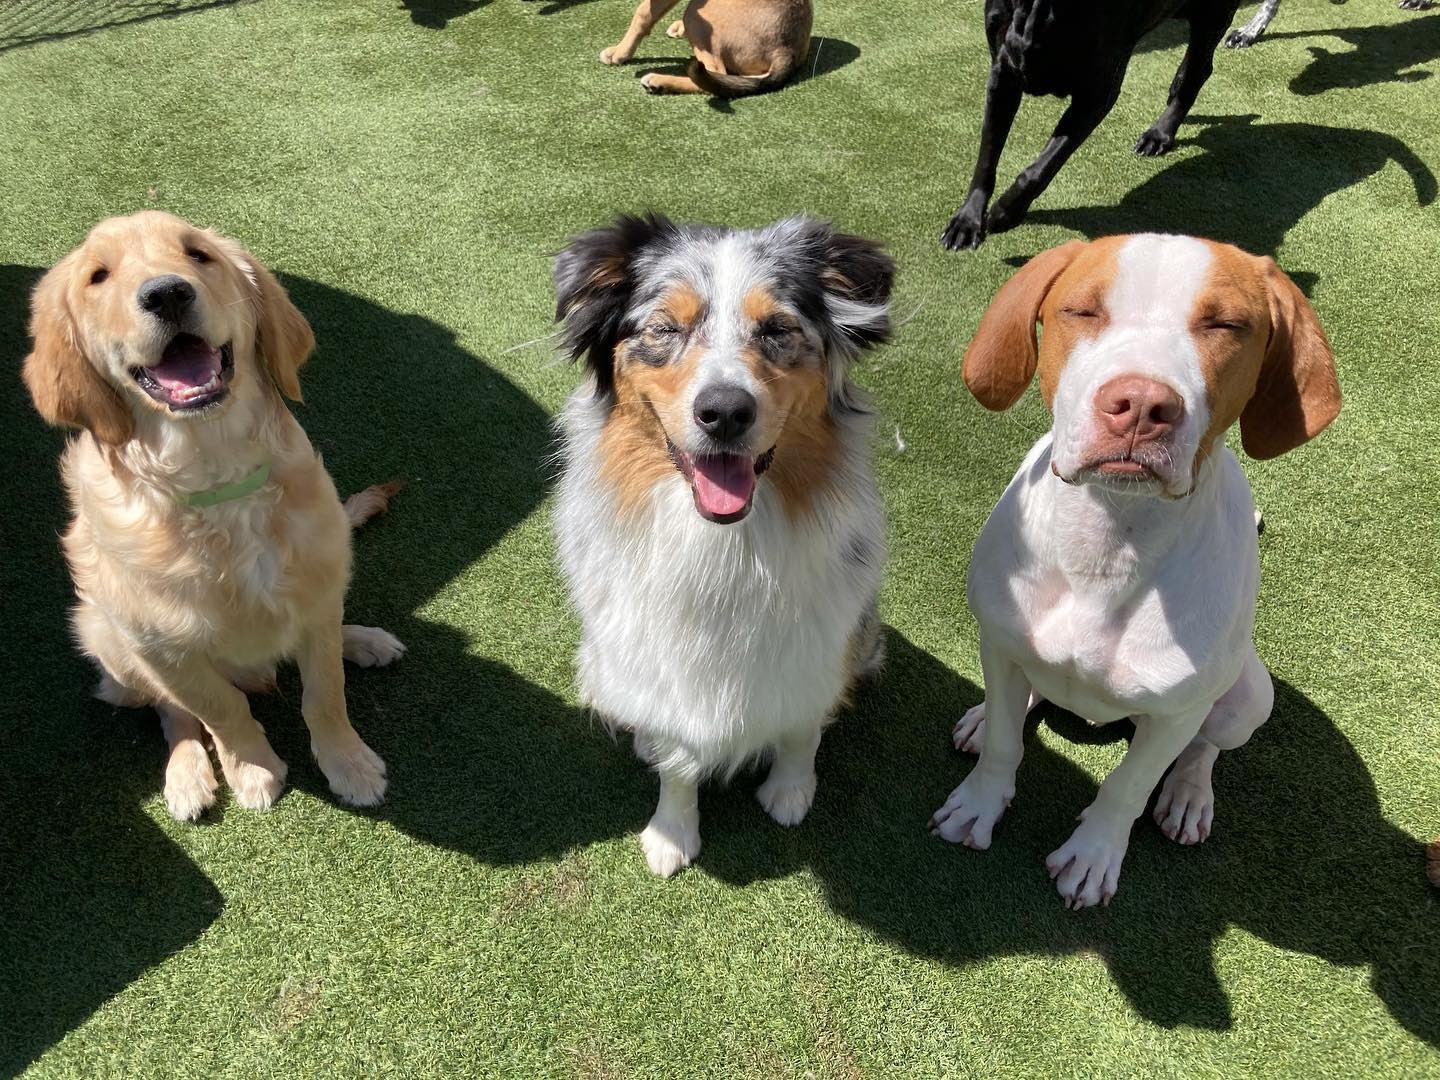 Dog pack at doggie daycare